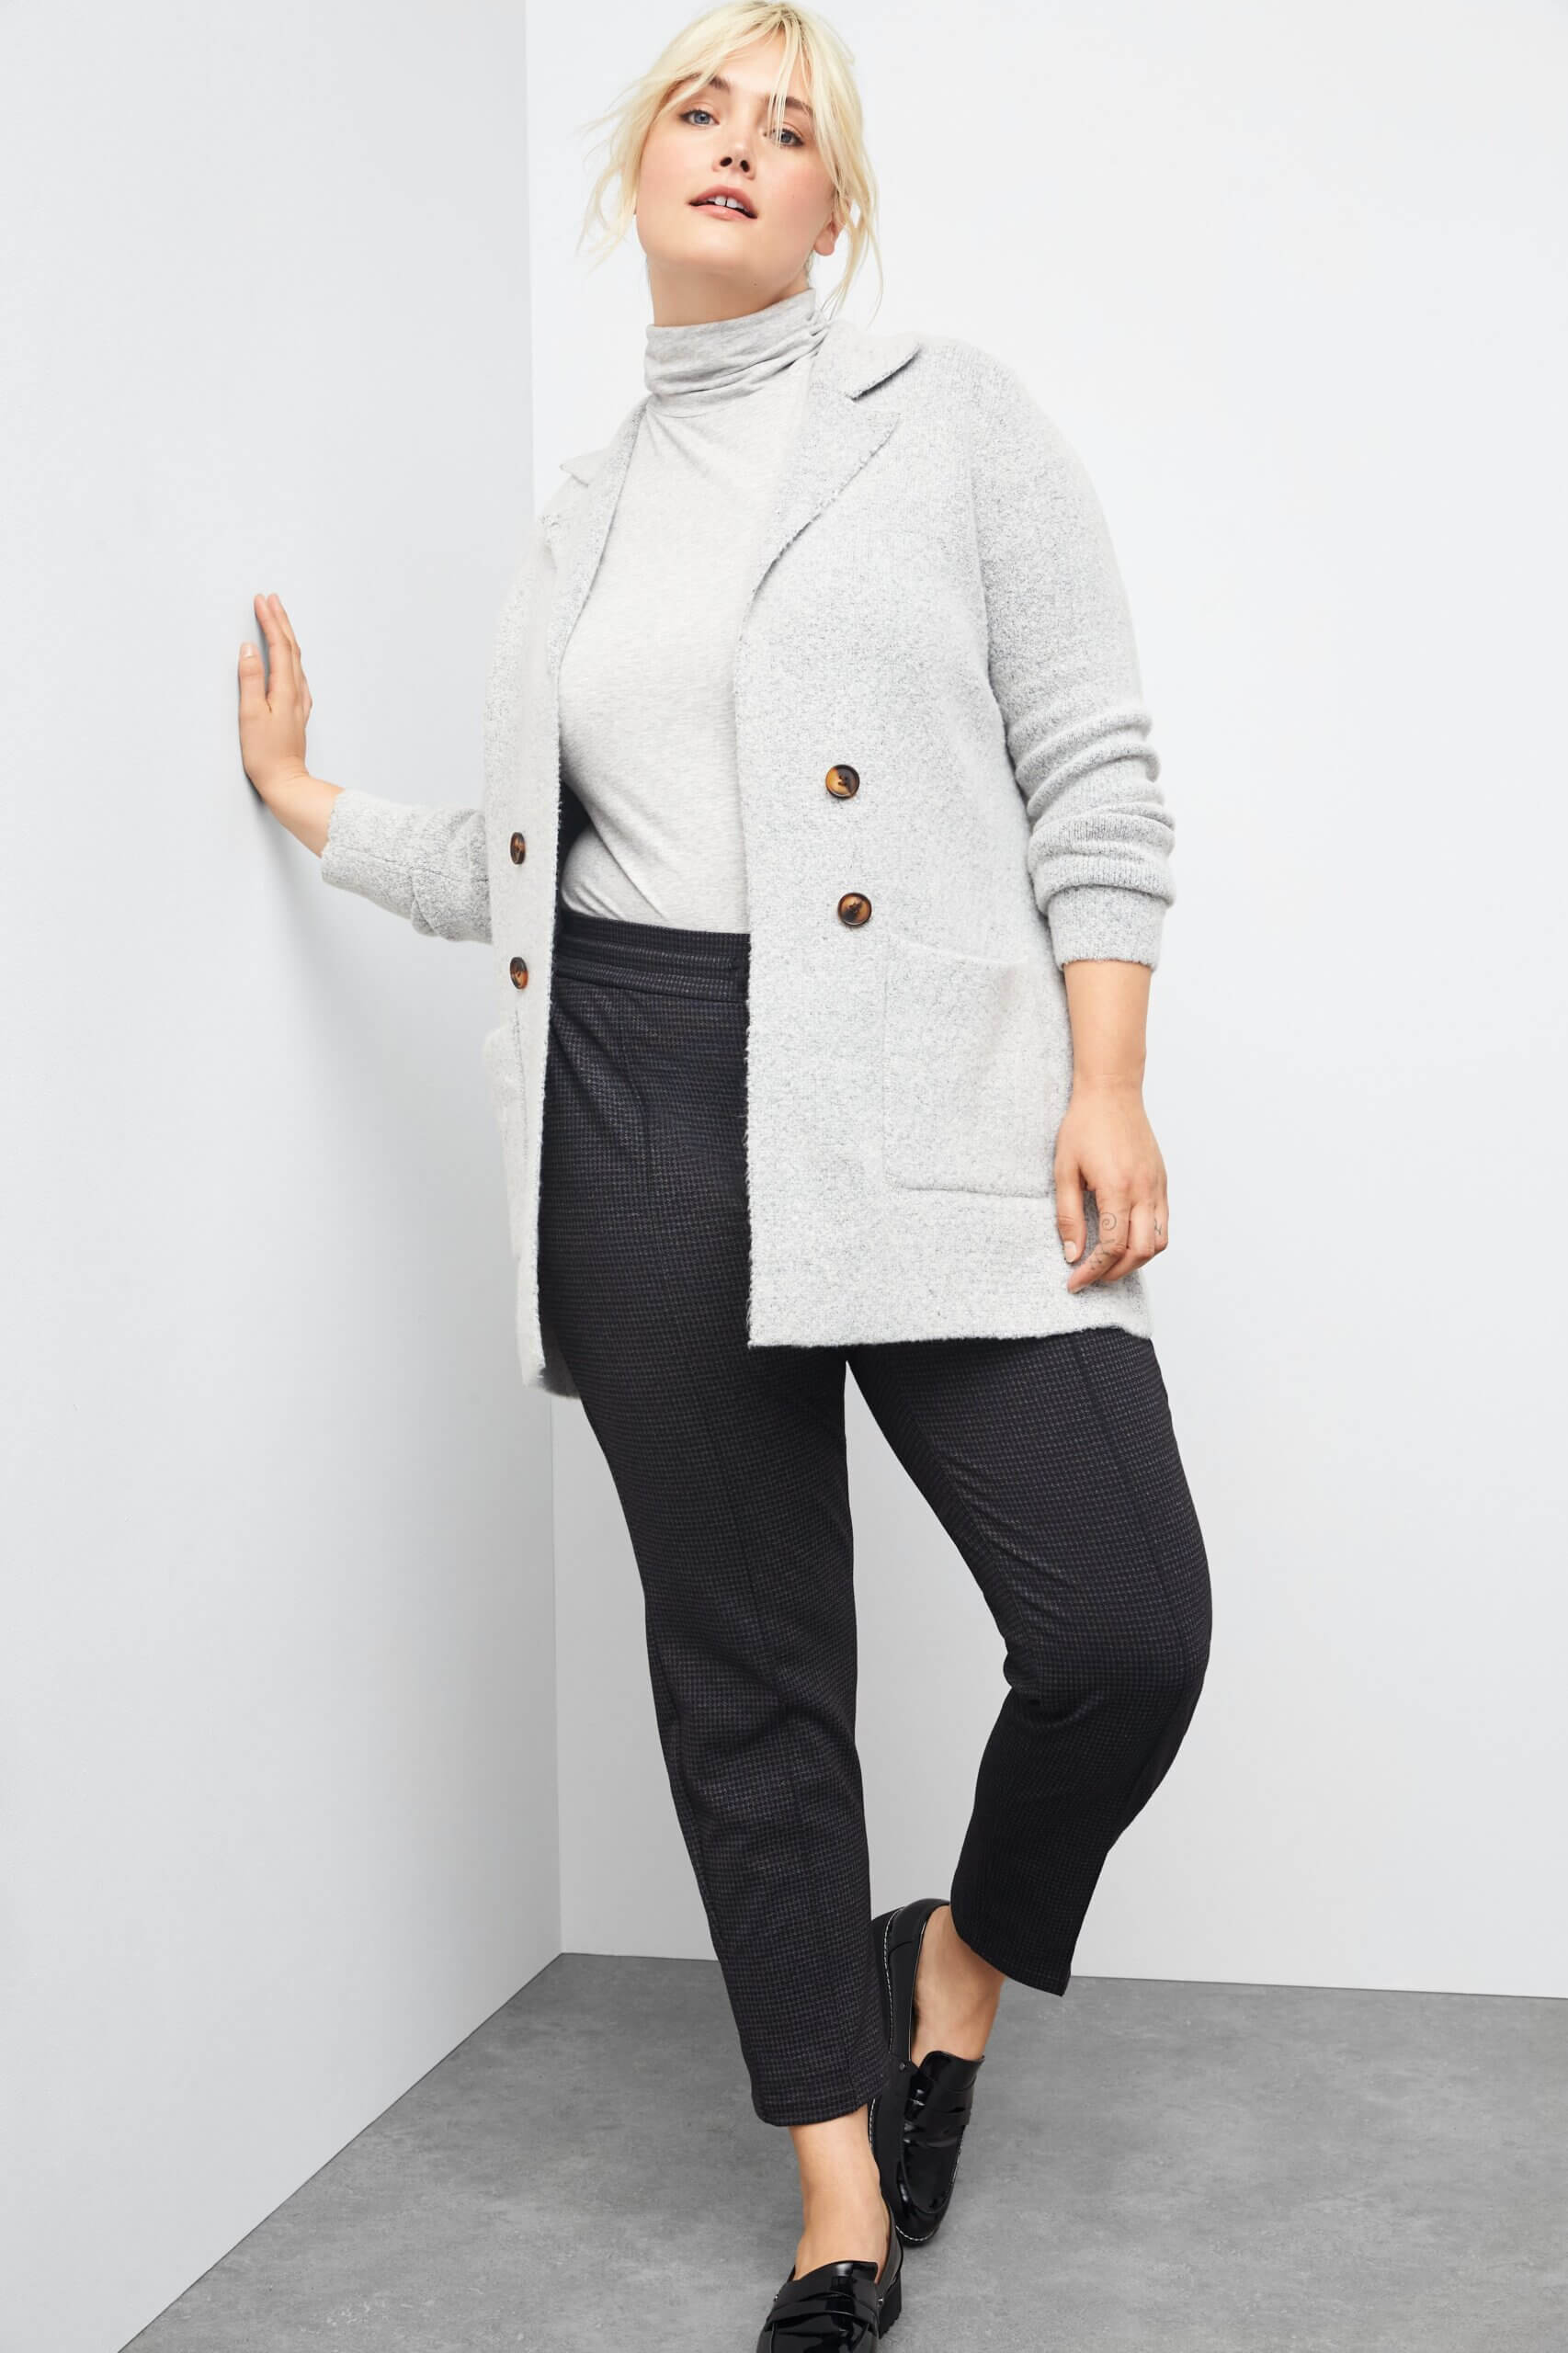 Winter Business Casual Fashion Tips for Women